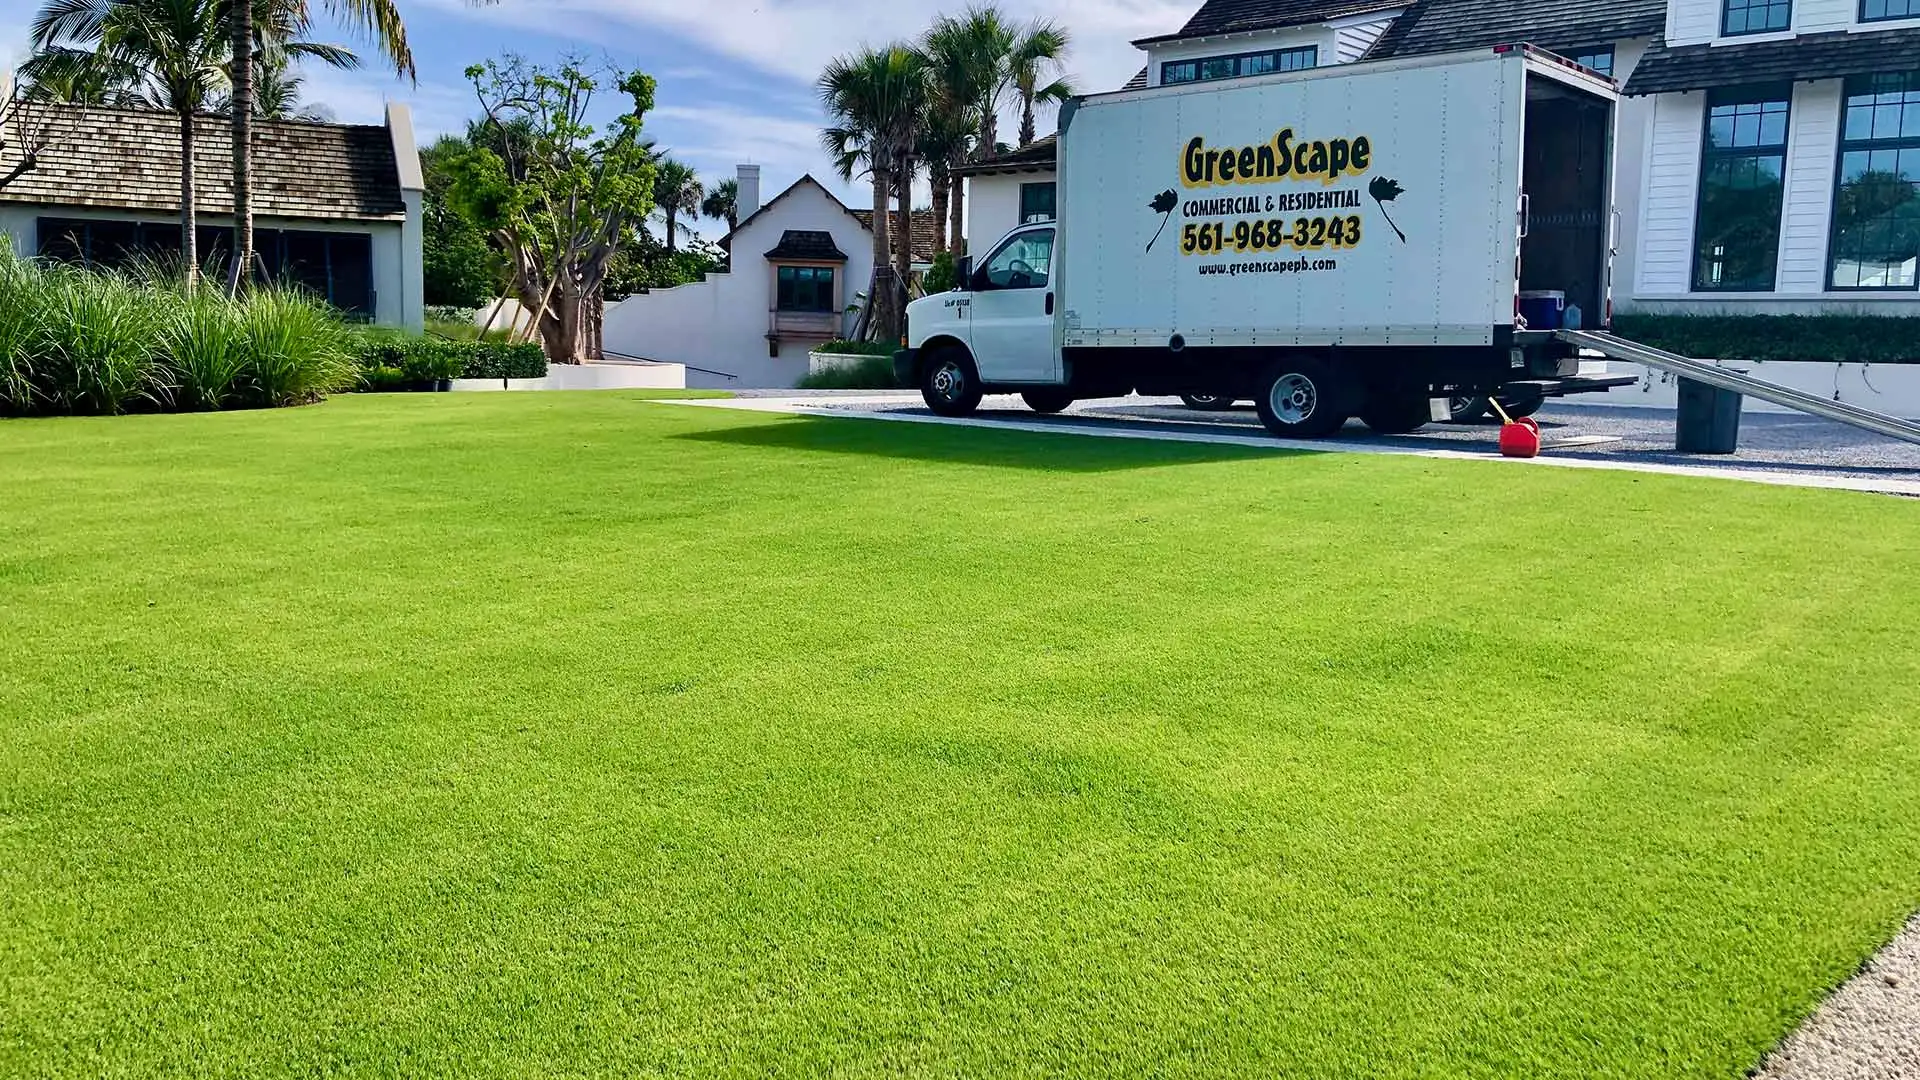 This luxury home uses fertilization and weed control treatments in Manalapan, FL.